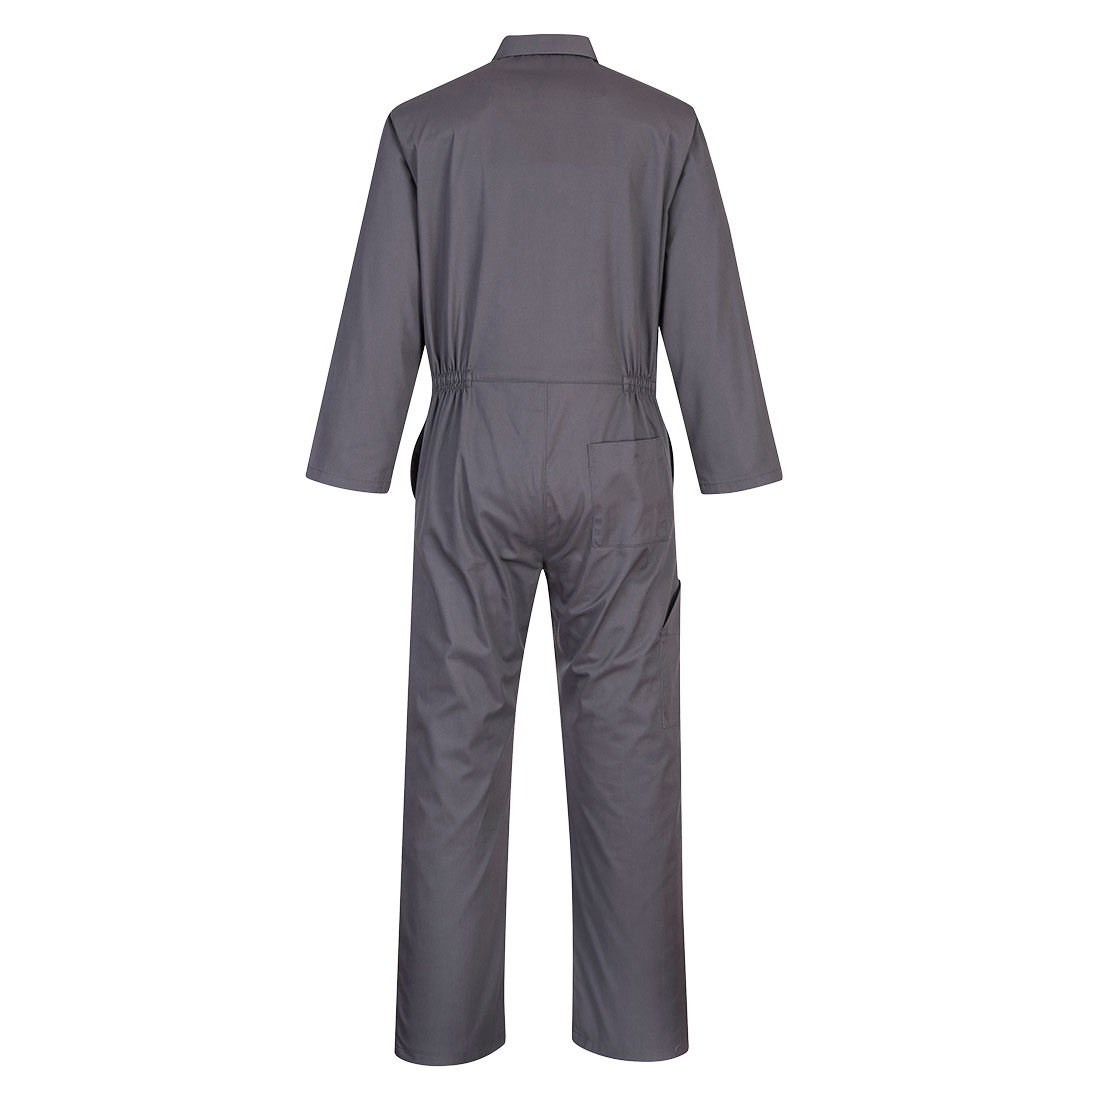  Popular Classic Strong Windproof Work Polycotton Winter Coverall 